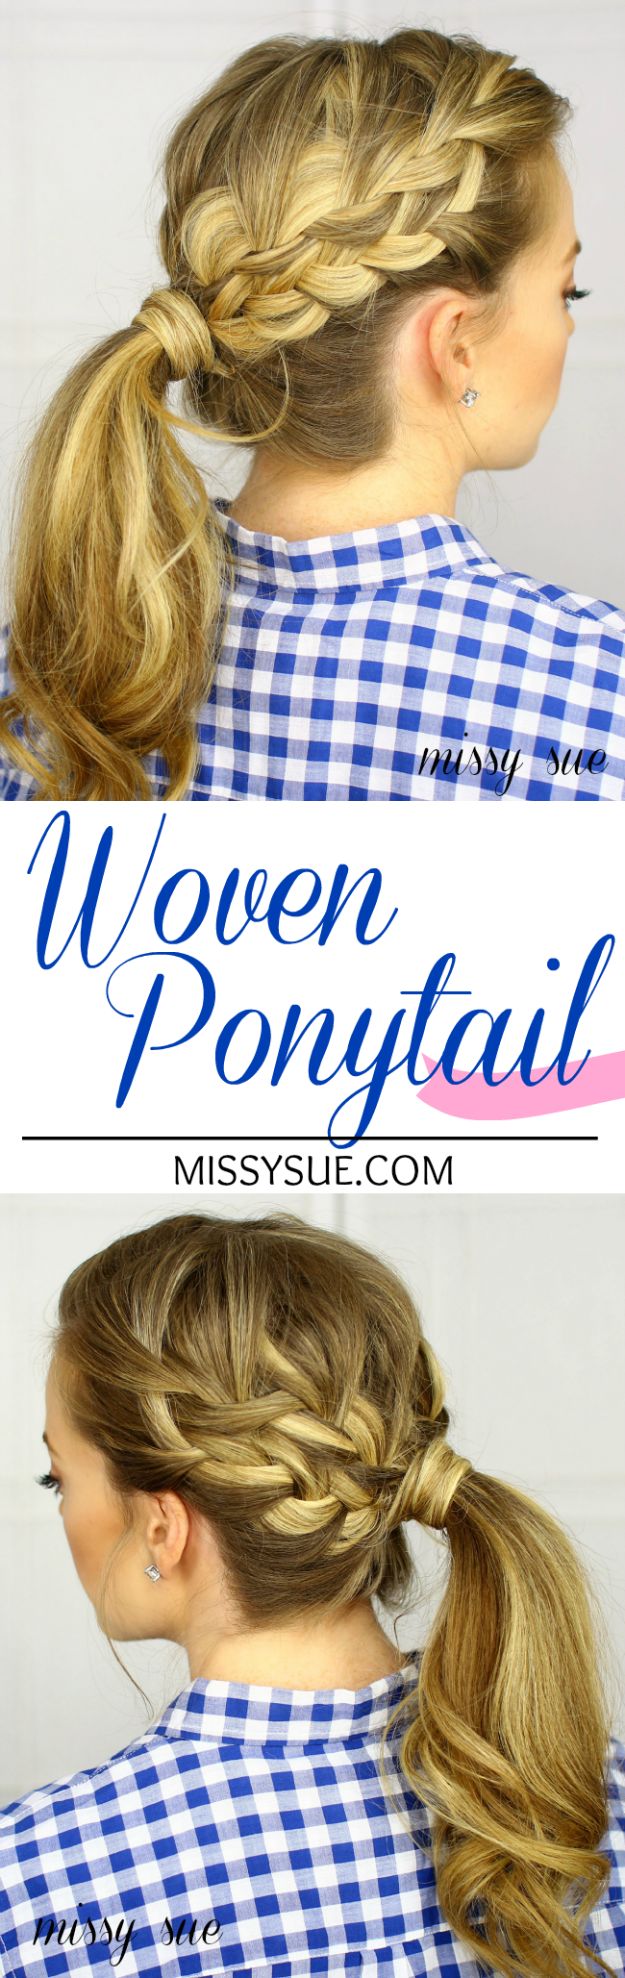 Cool Hair Tutorials for Summer - Woven Ponytail Tutorial - Easy Hairstyles and Creative Looks for Hair - Beachy Waves, Hair Styles for Short Hair, Medium Length and Long Hair - Ponytails, Updo Ideas and Quick Last Minute Hairstyle for Teens, Teenagers and Women 